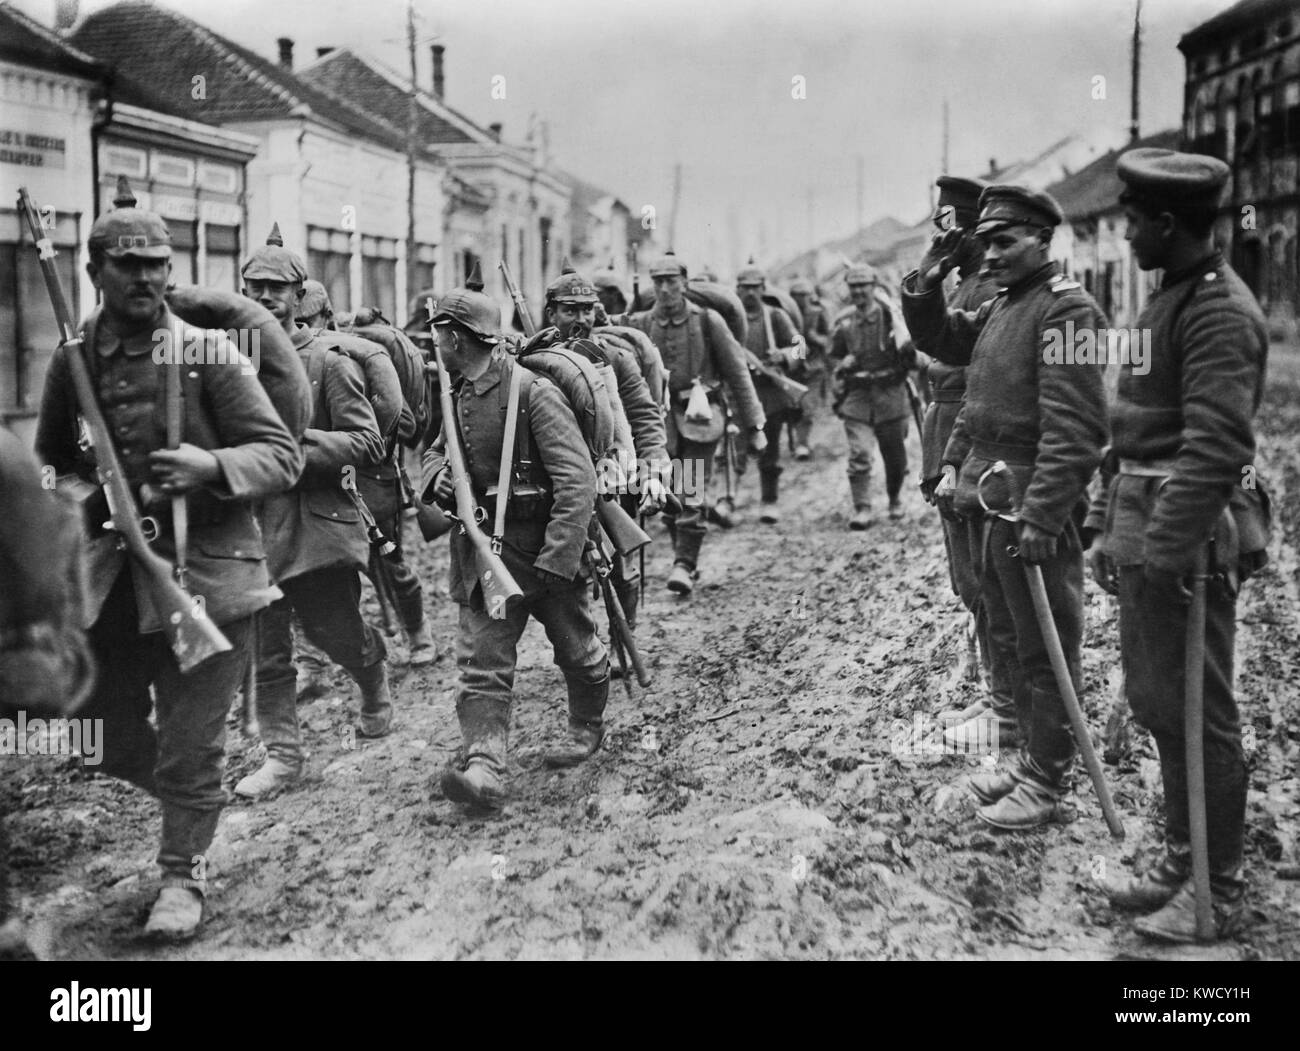 German soldiers marching through the Serbian town of Paracin in 1915, during World War I. (BSLOC 2017 1 178) Stock Photo